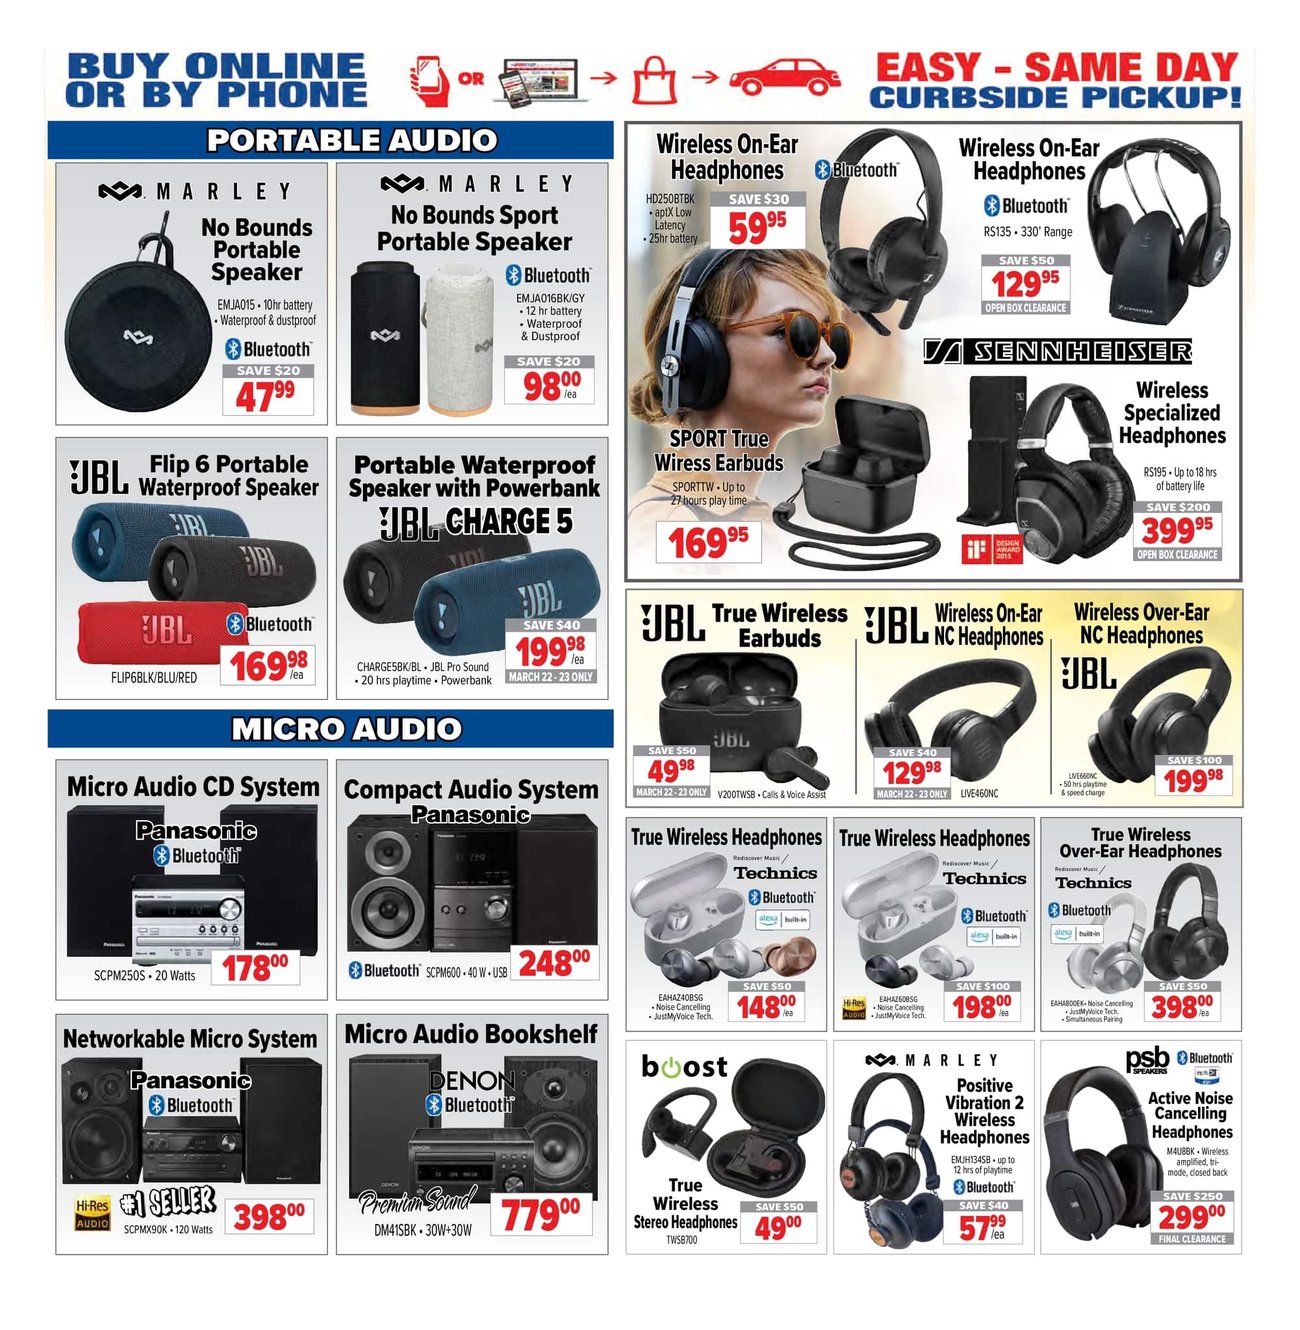 2001 Audio Video - Weekly Flyer Specials - Page 6